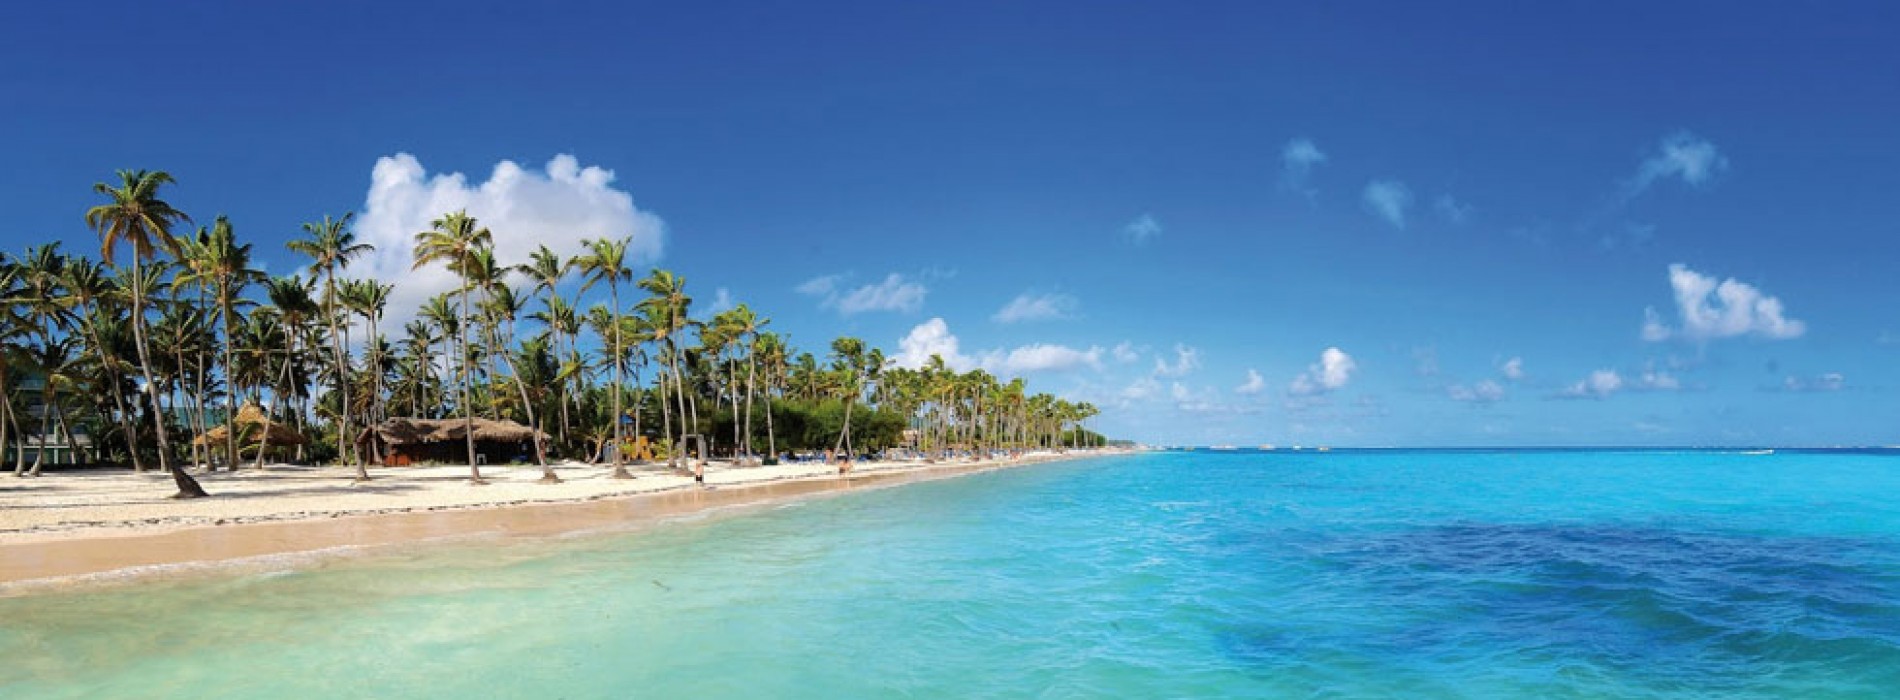 PUNTA CANA NAMED #1 DESTINATION IN THE CARIBBEAN IN 2016